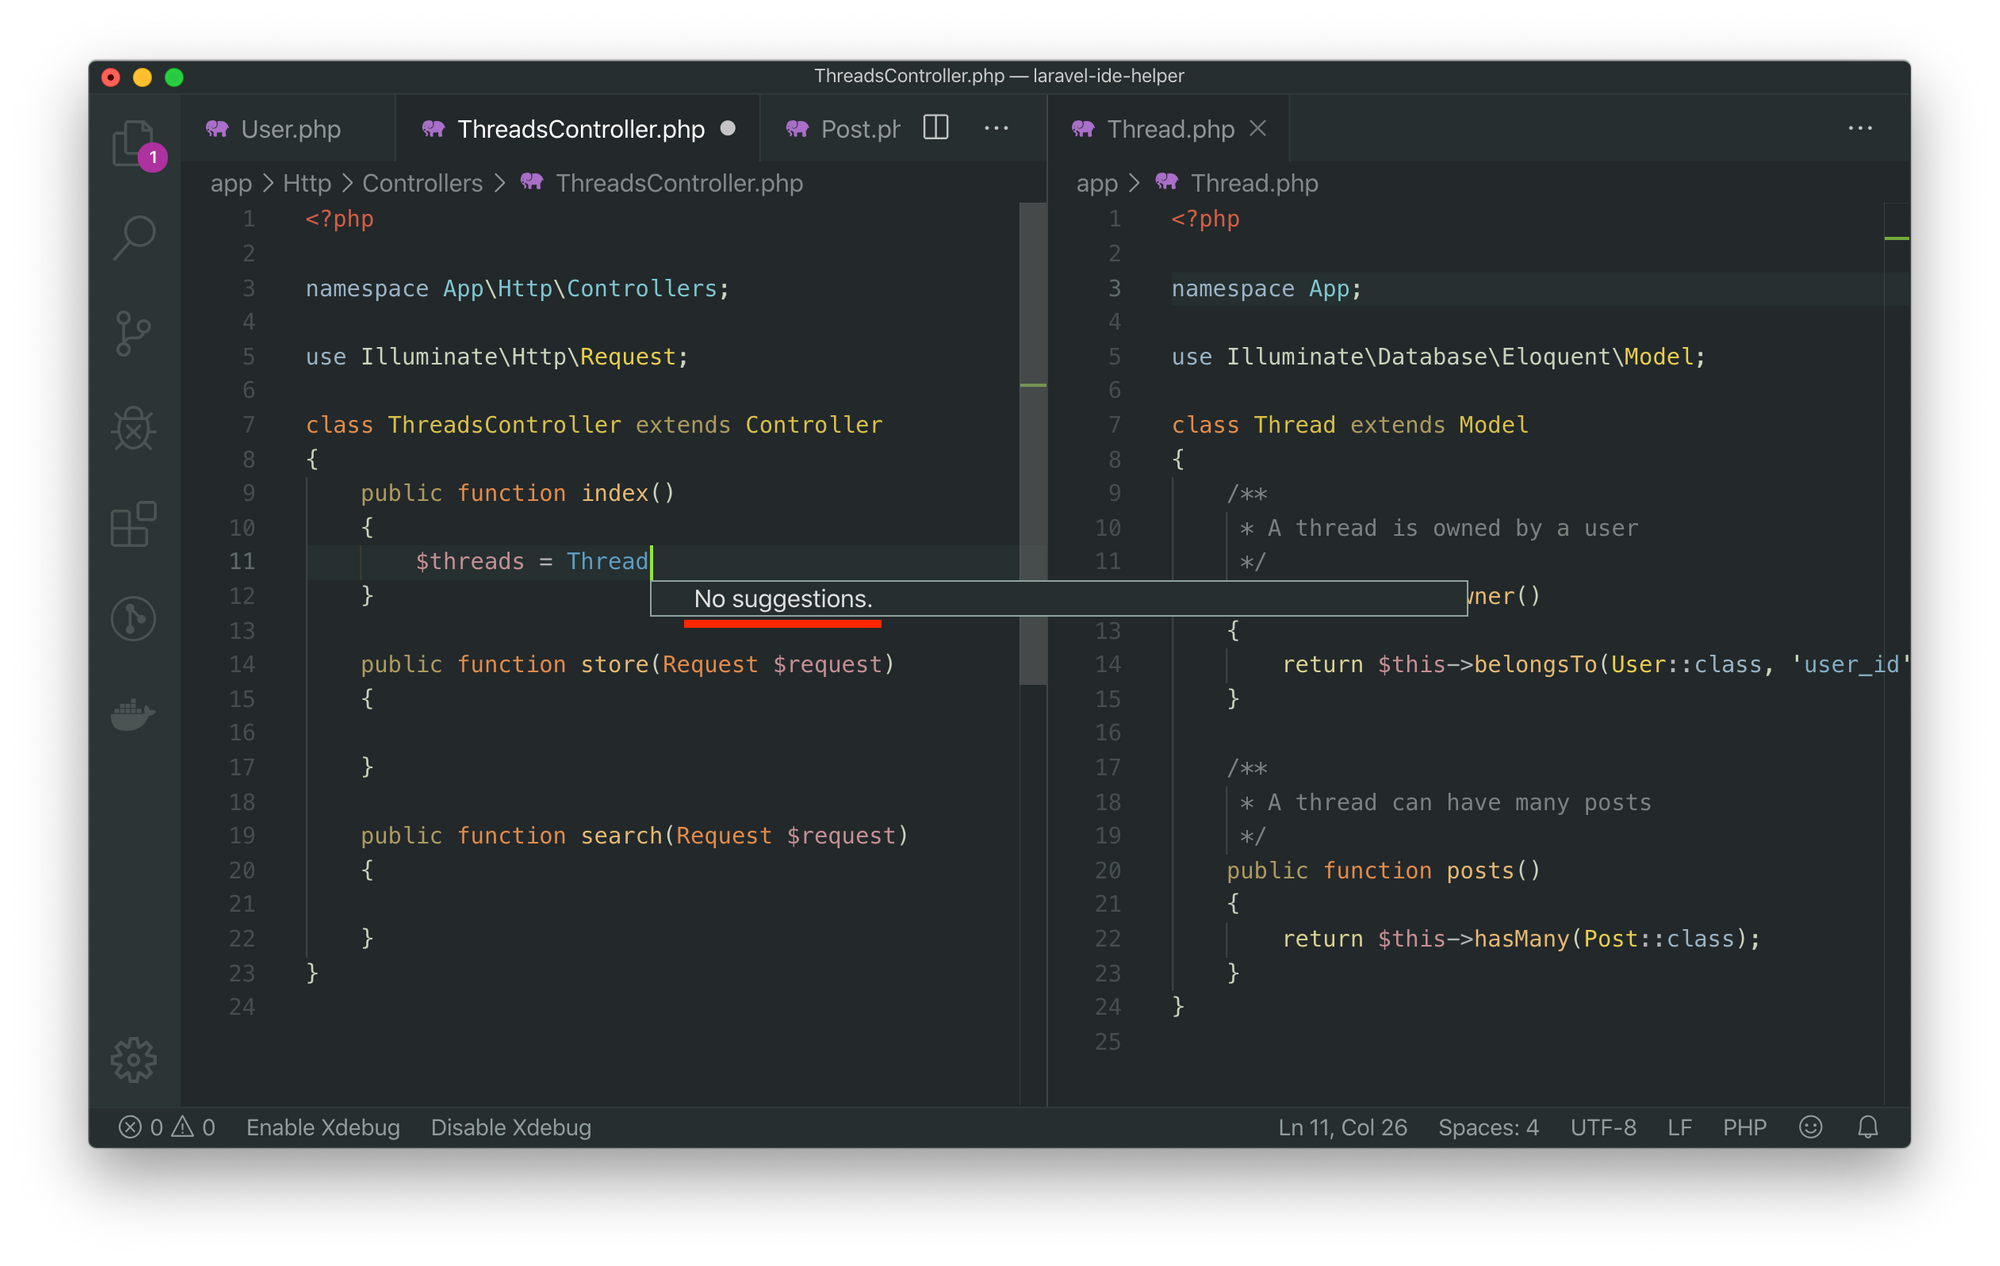 Screenshot of VSCode editor with an error message, saying that there’s no suggestions for the “Thread” keyword.